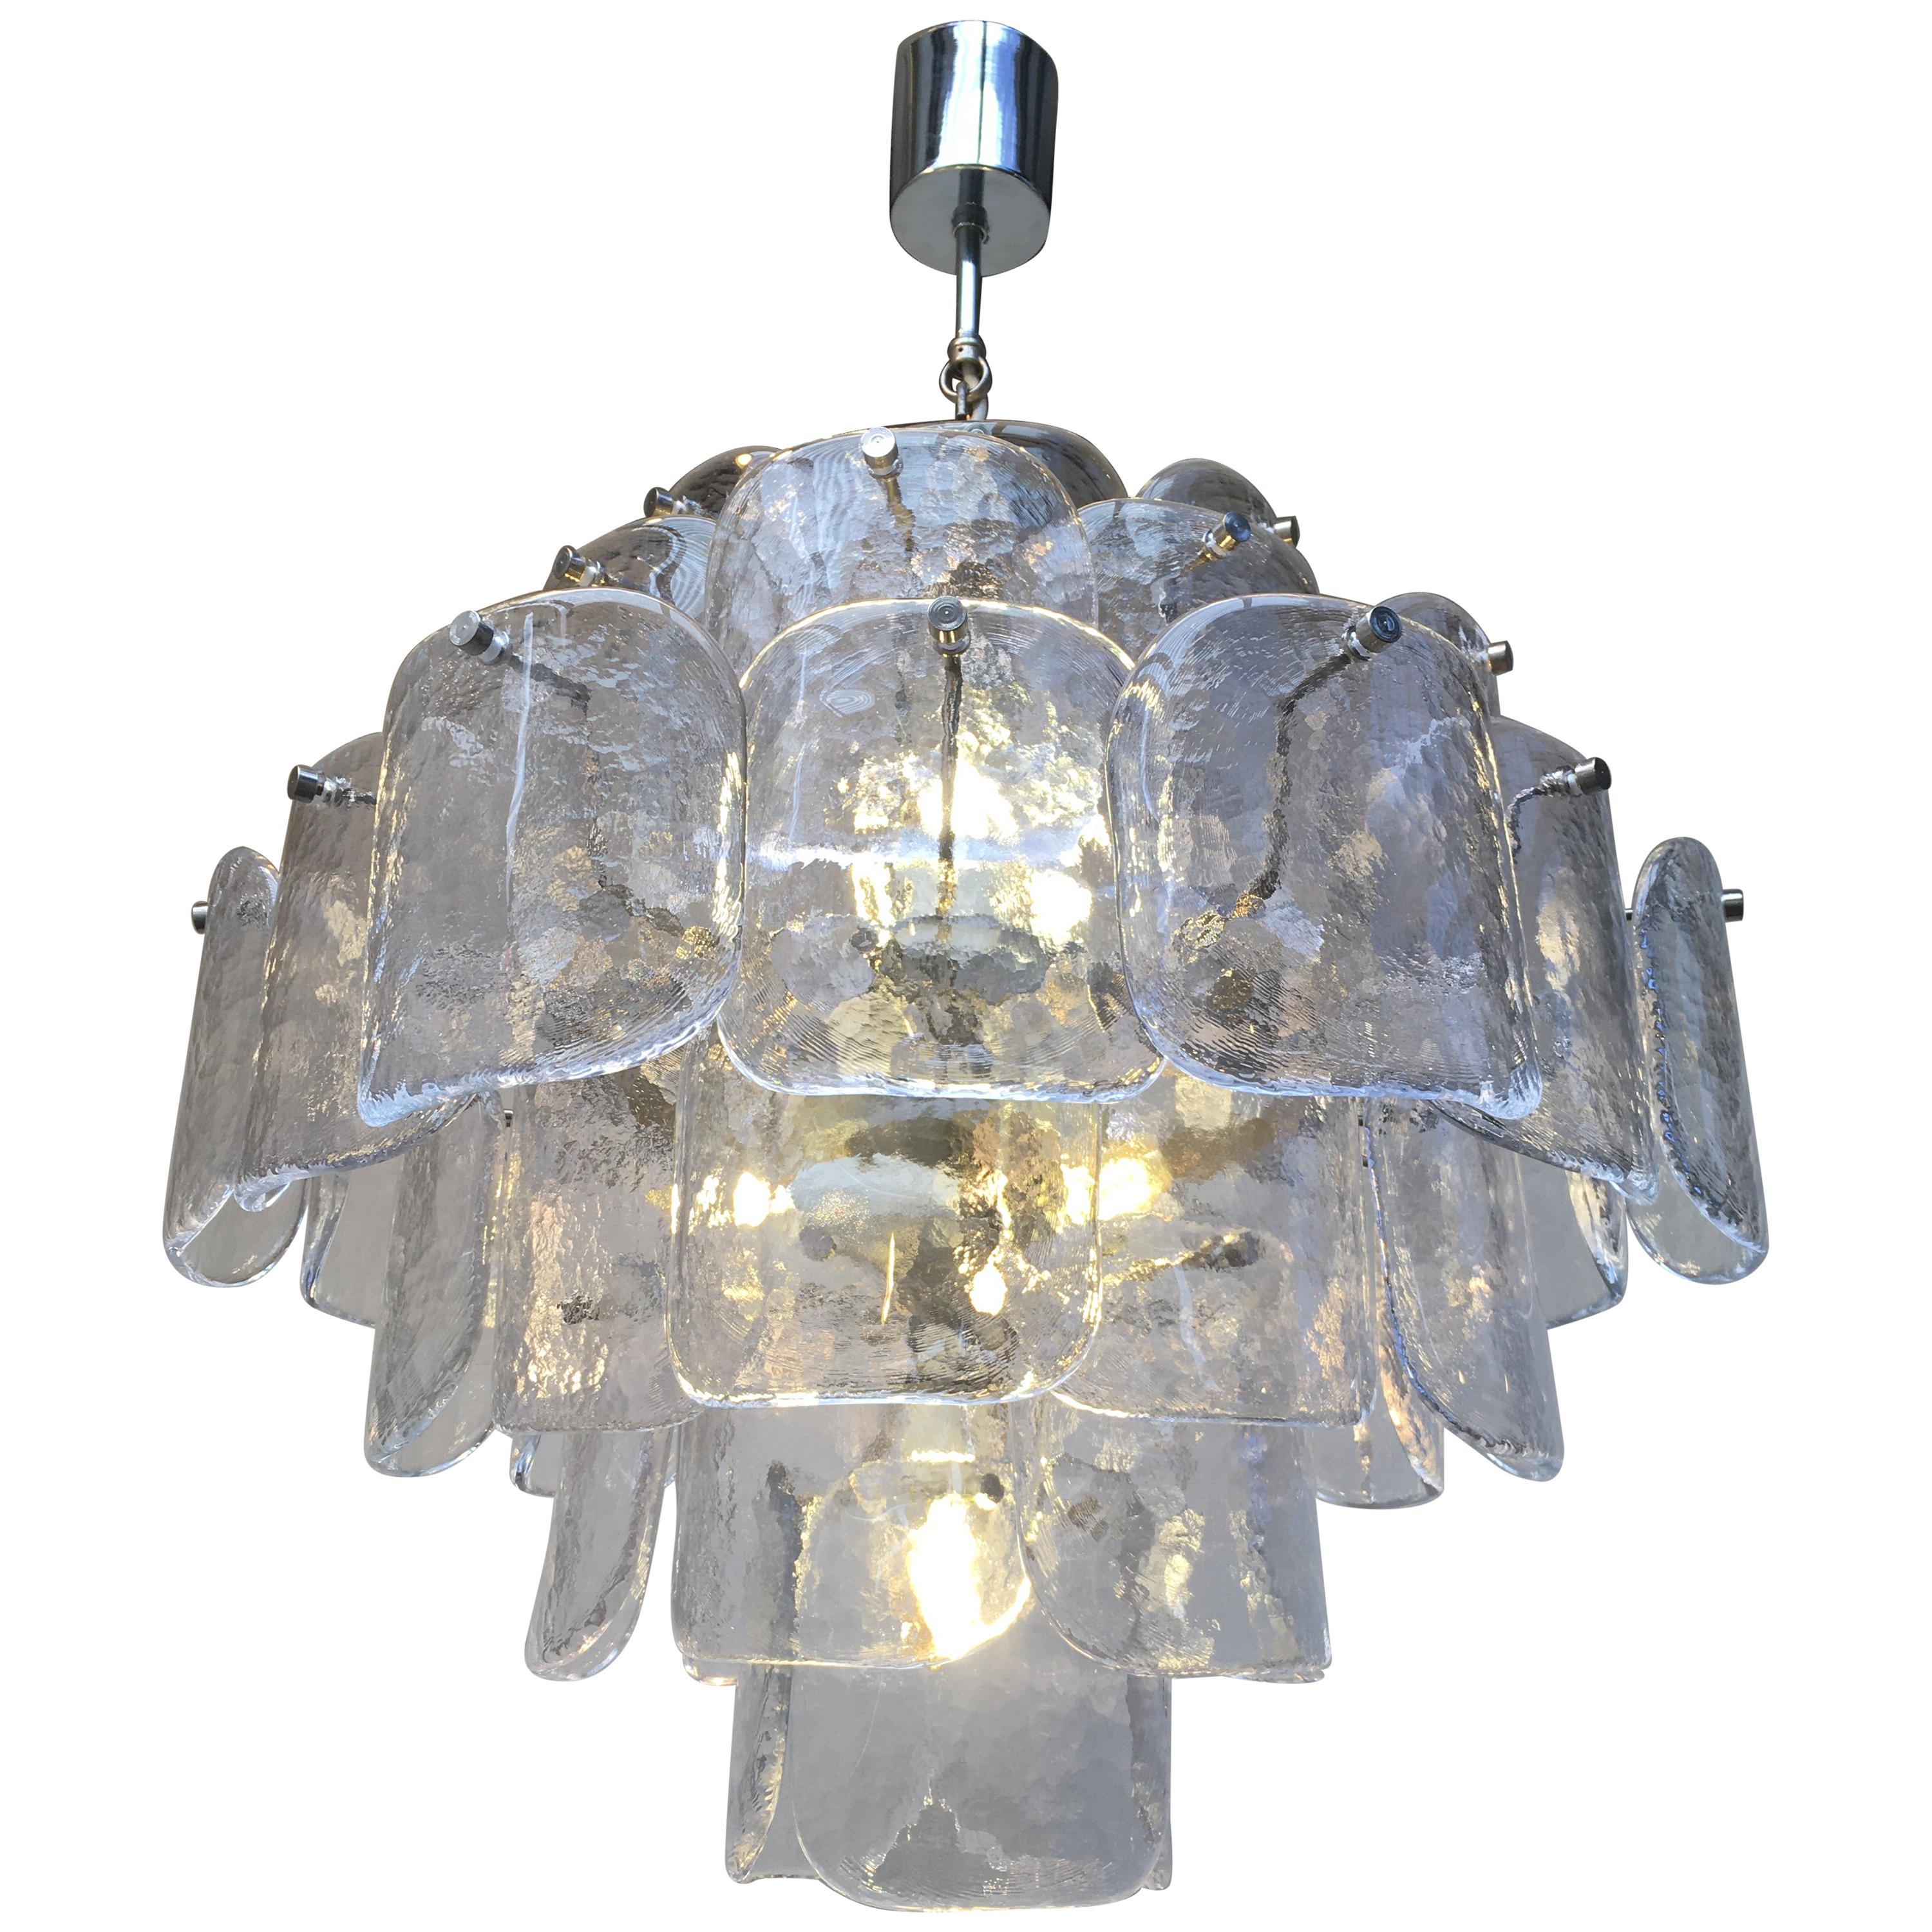 Large Six-Tier Carlo Nason Mazzega 1960s Chandelier in Clear Glass and Chrome